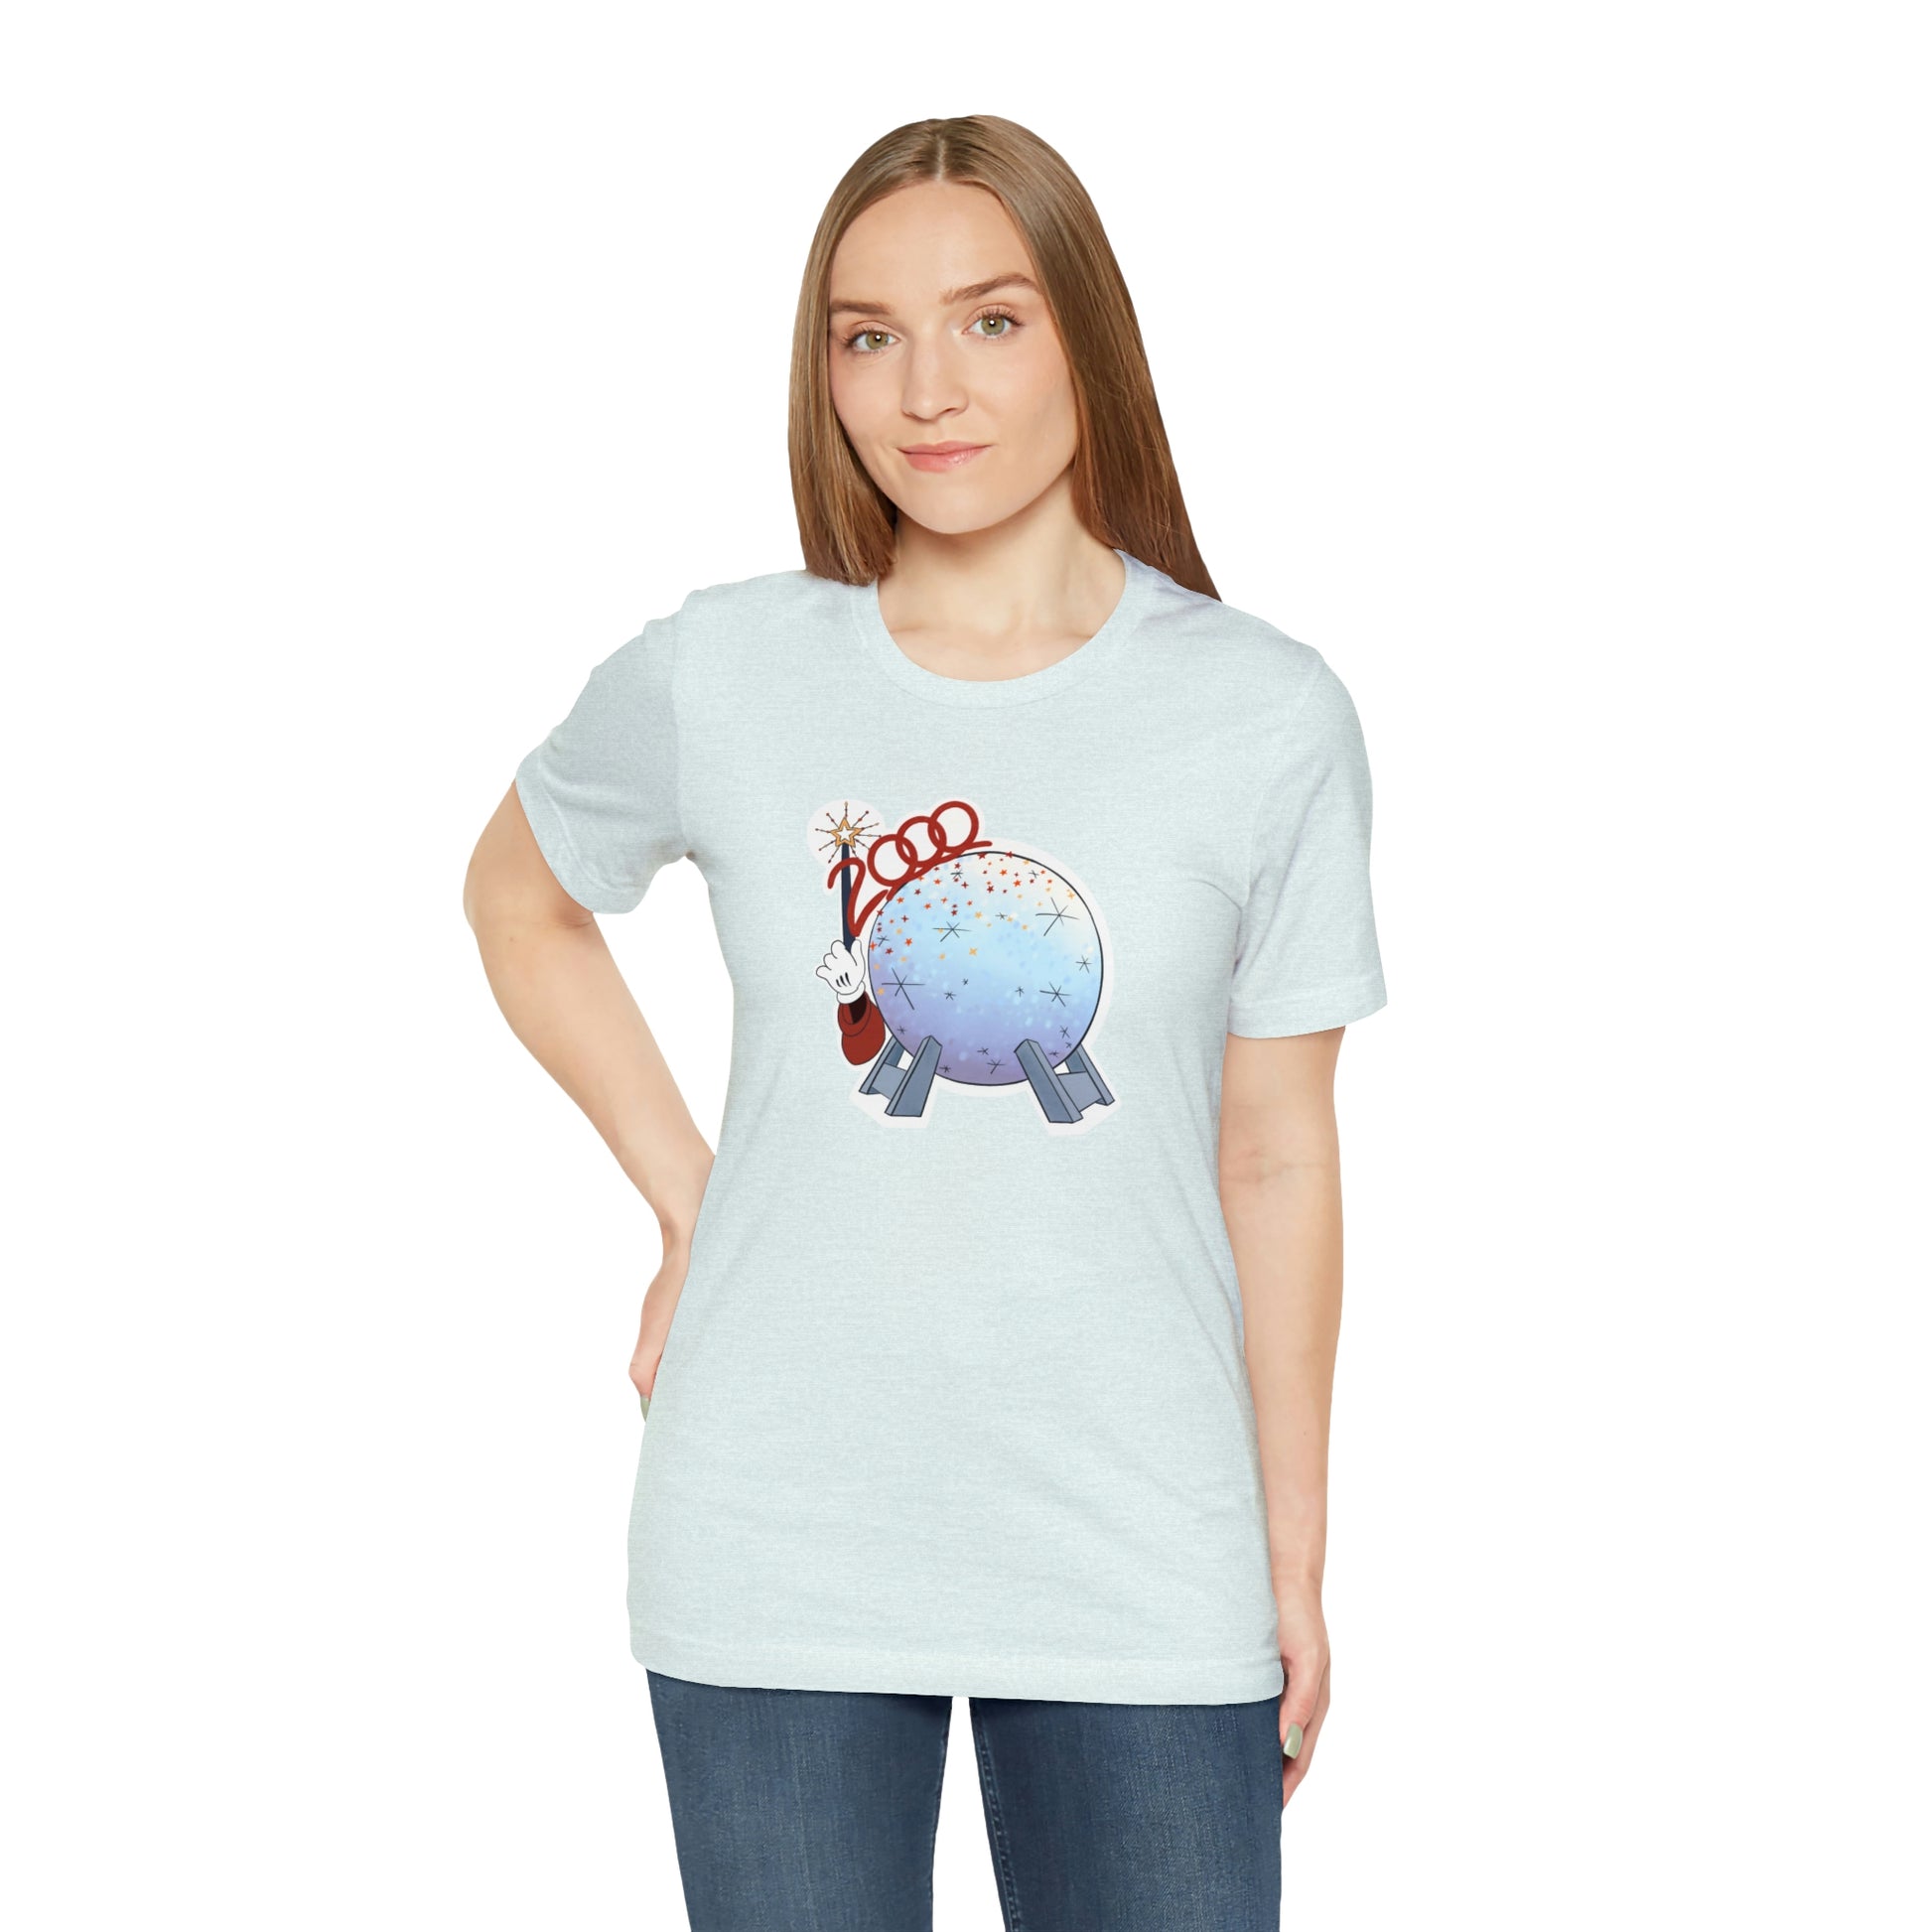 Epcot 2000 shirt ice blue Womens fit